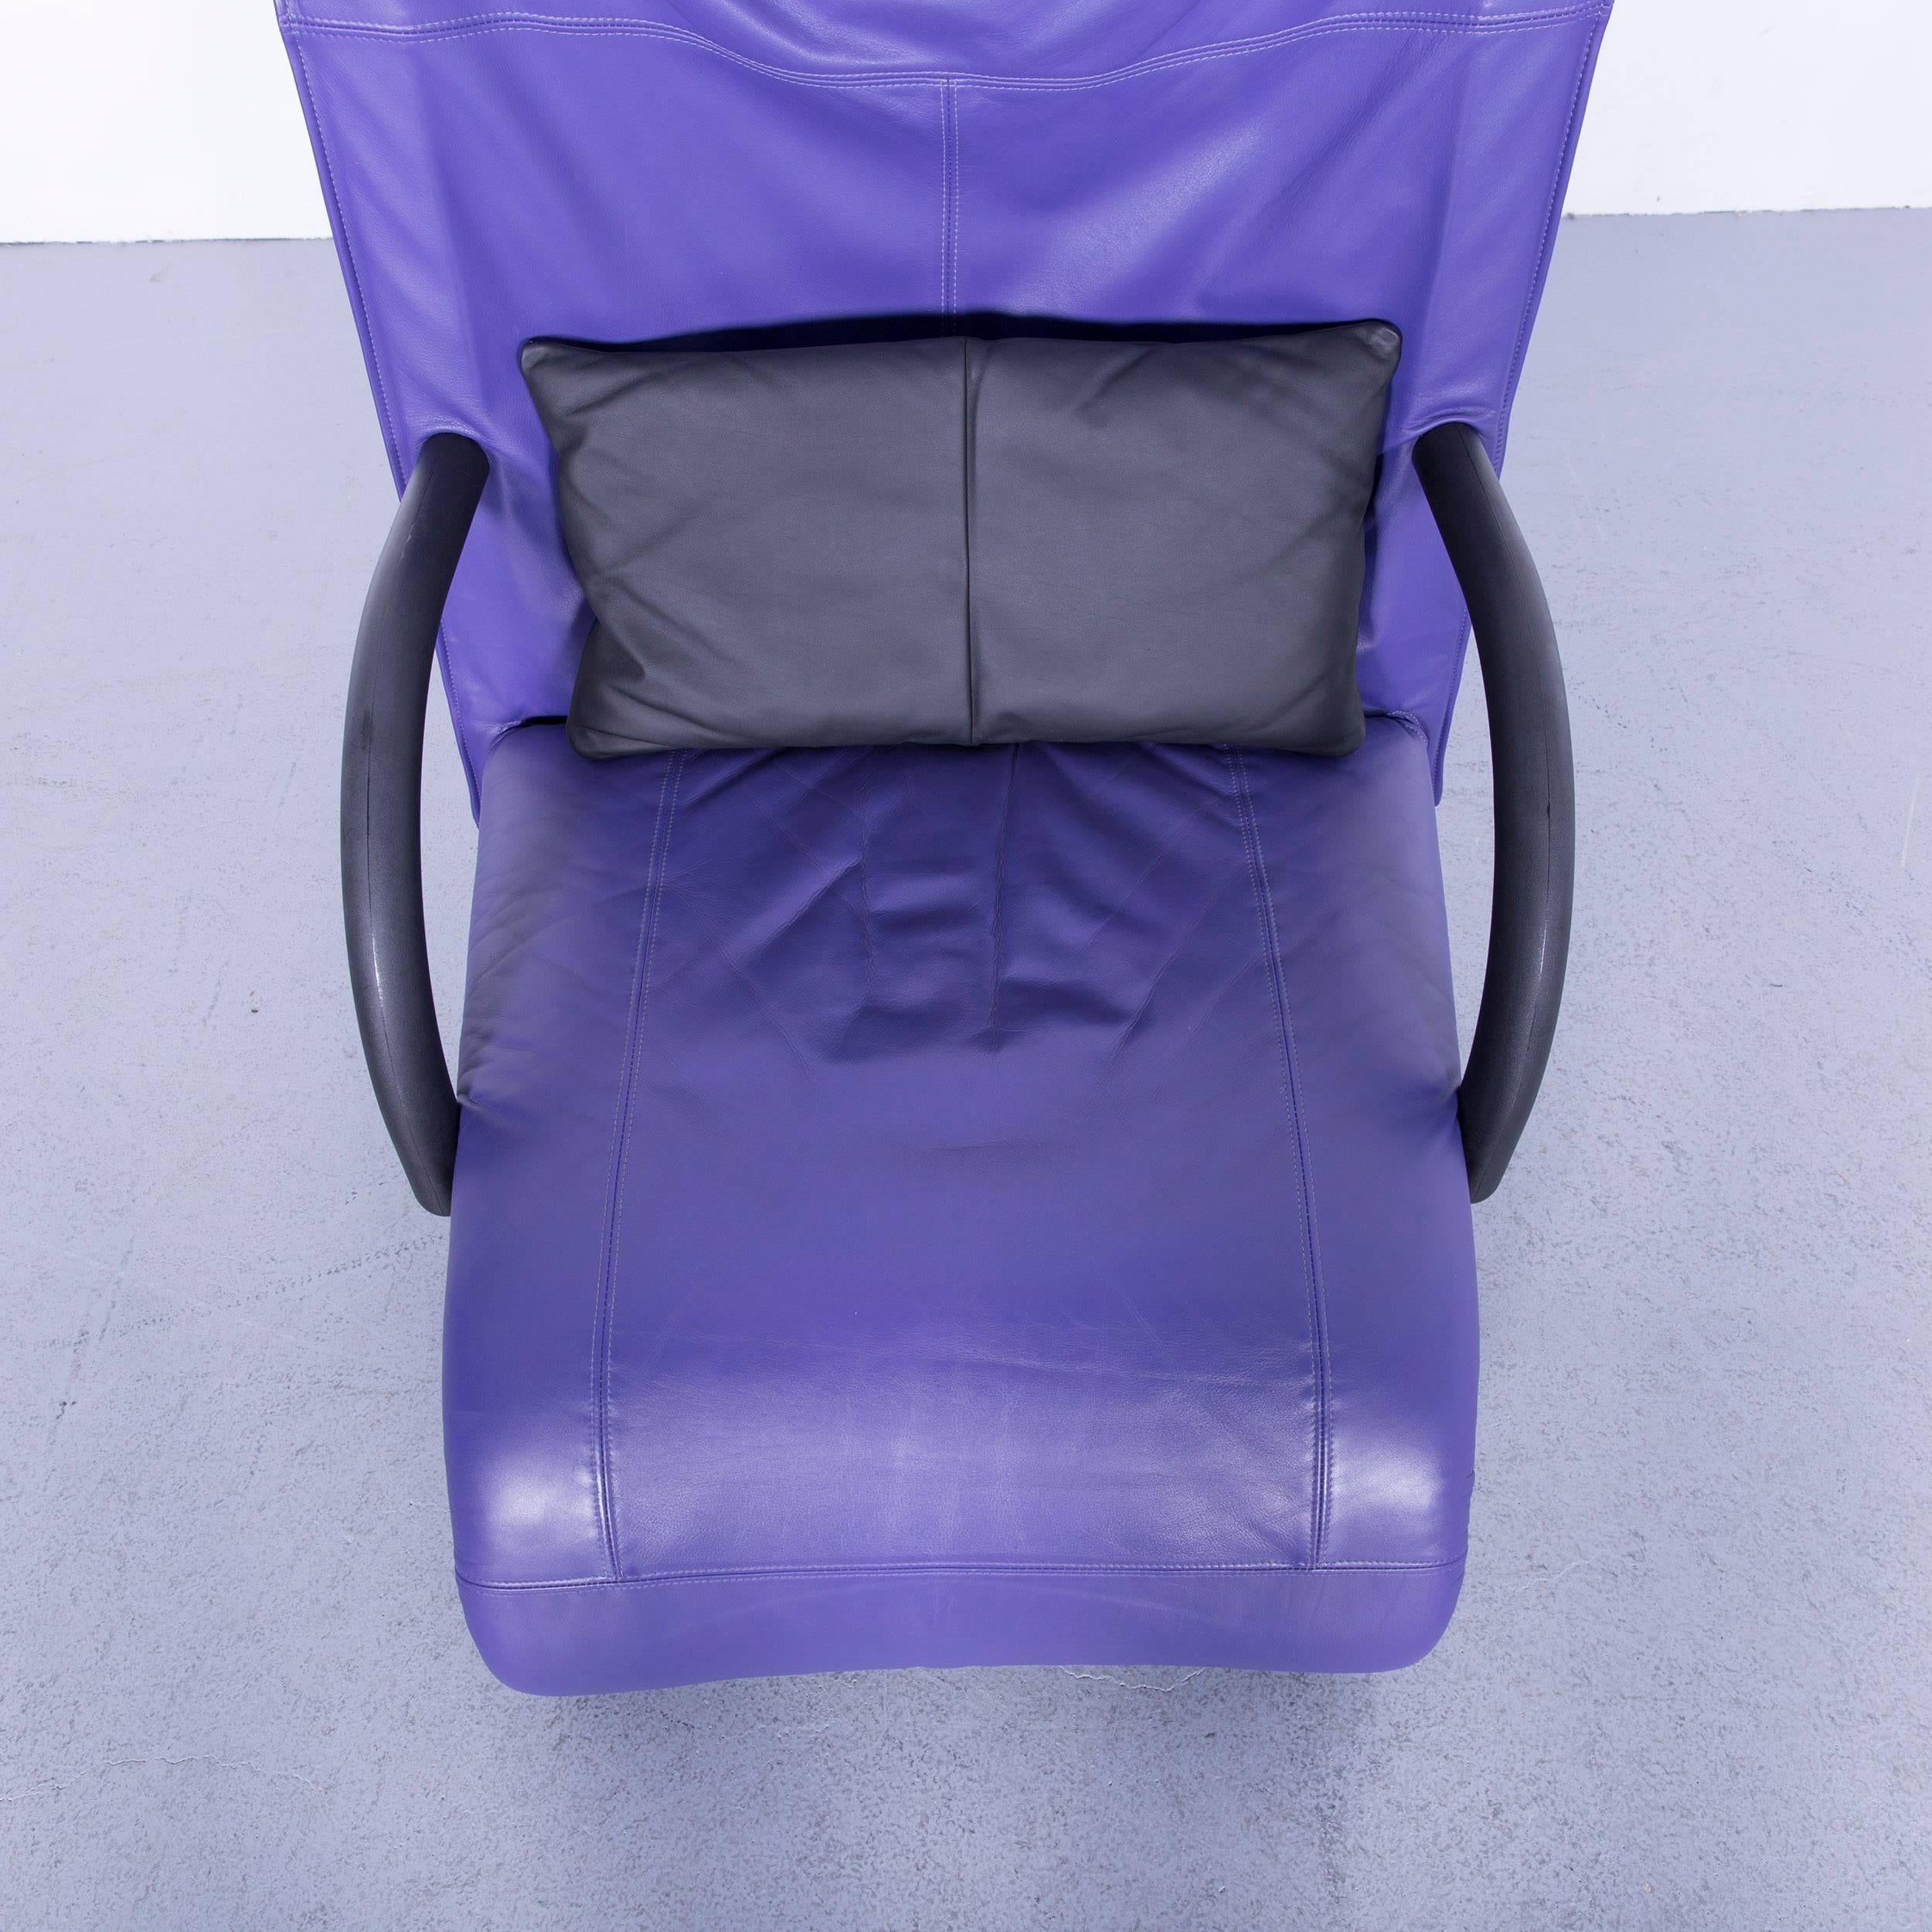 Ligne Roset Leather Armchair Violet One-Seat Swing-Chair For Sale 4